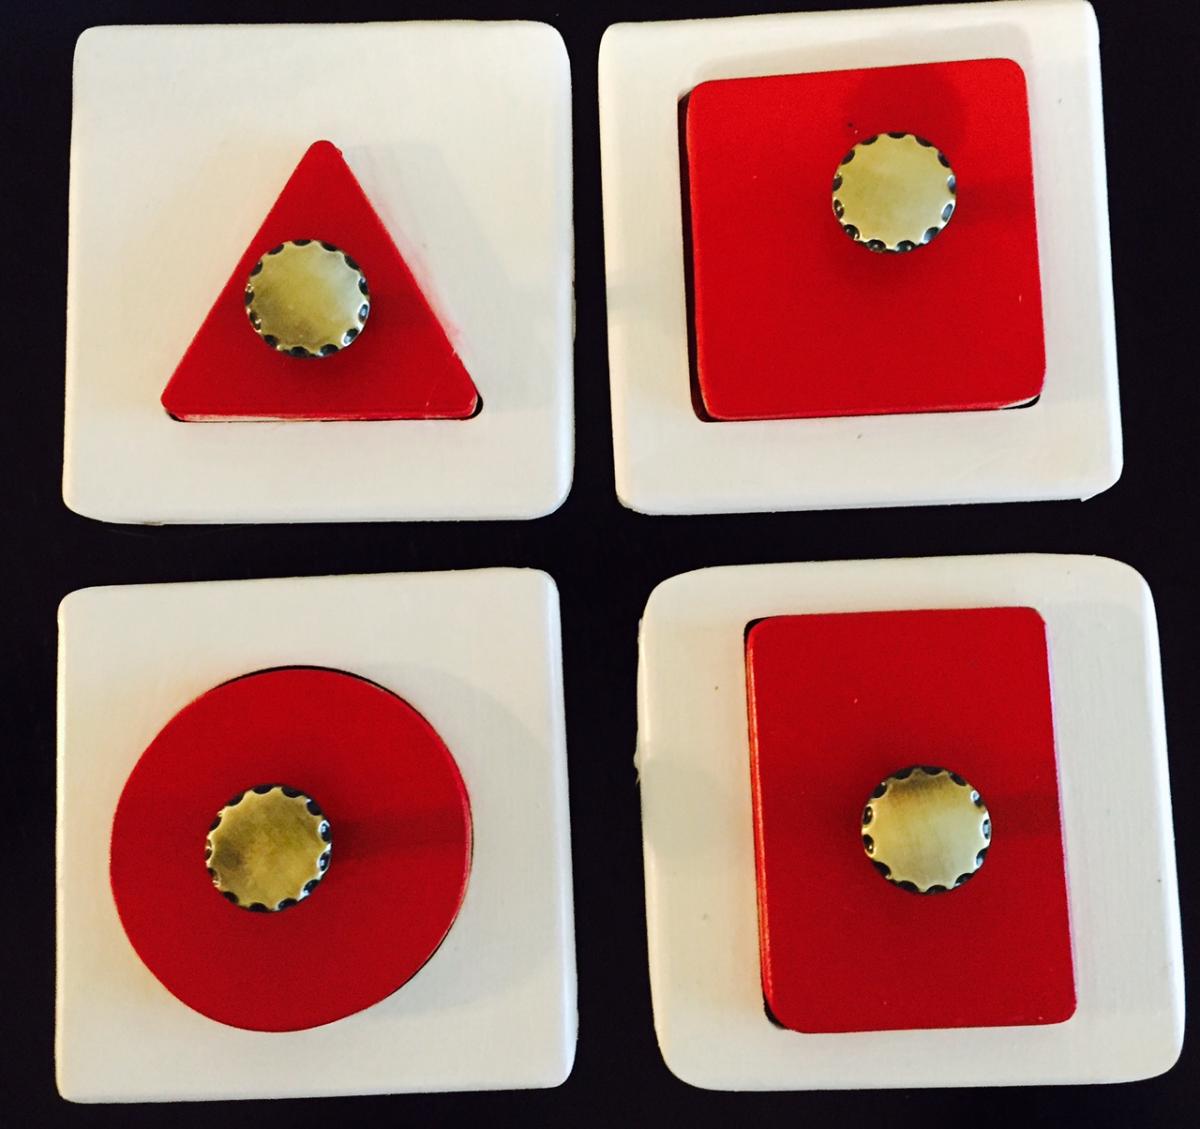 Four different shaped puzzles with knobs